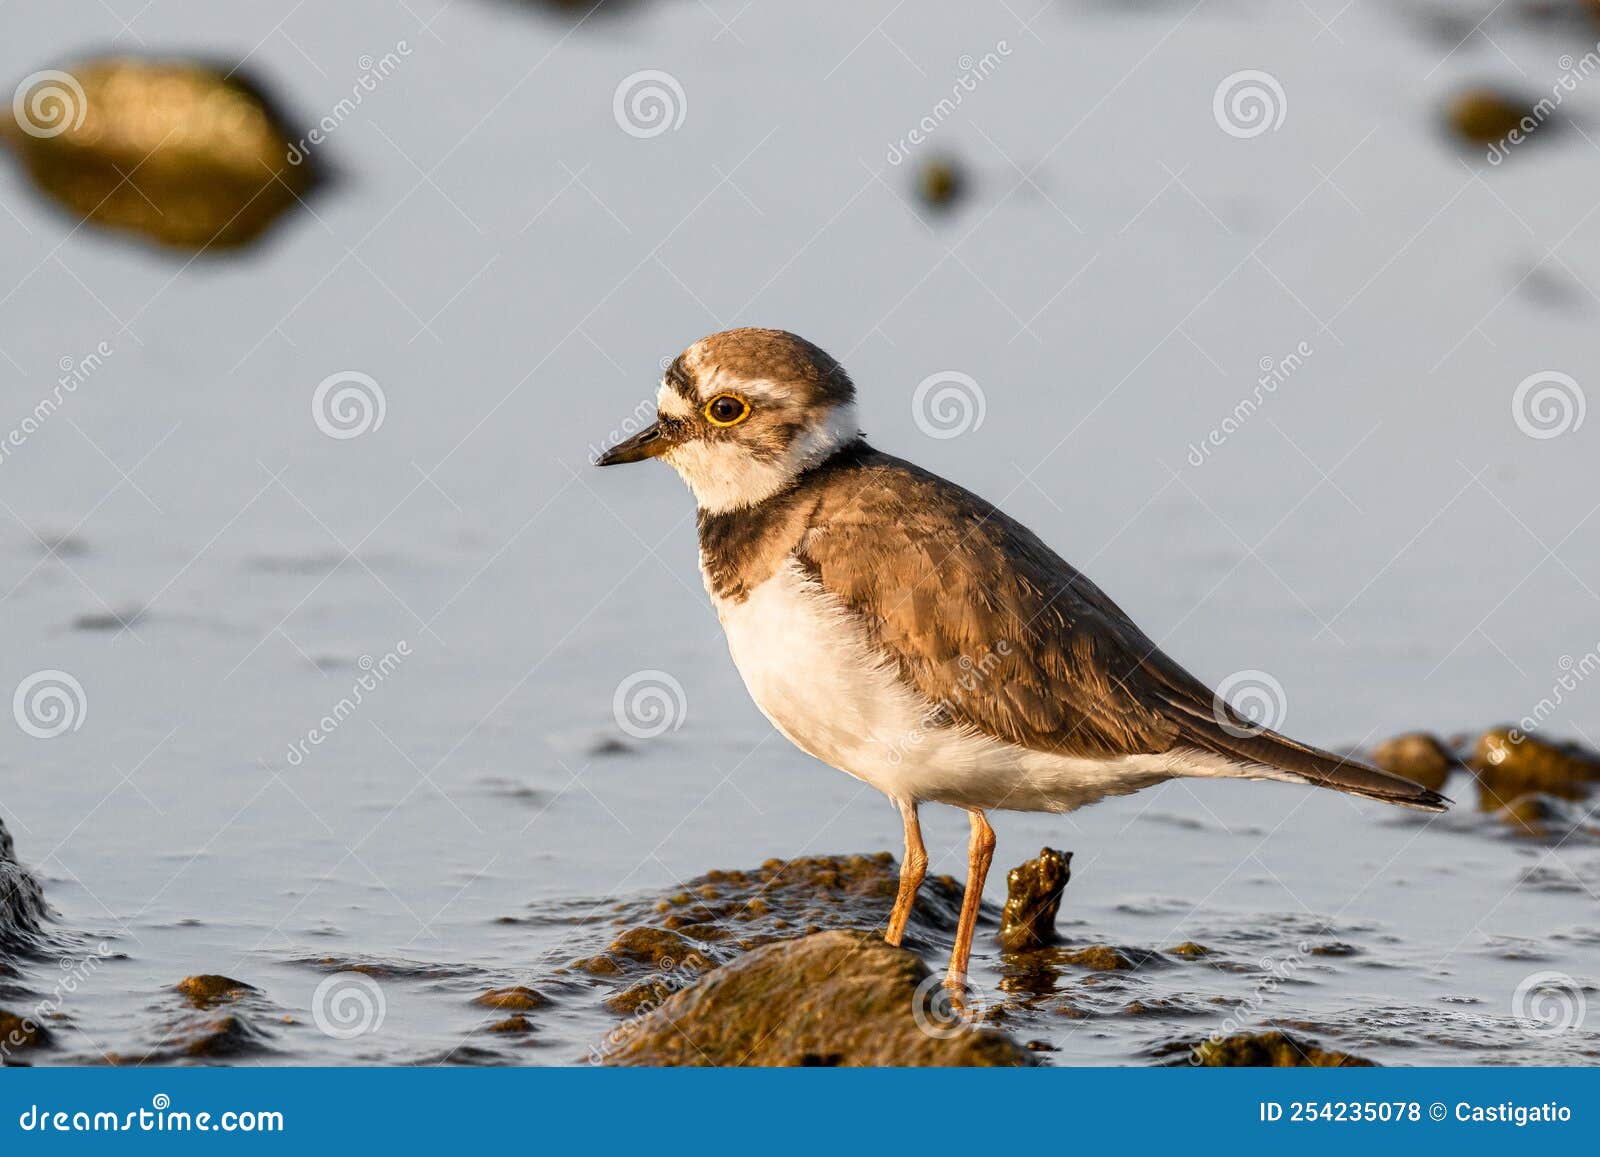 OPATIJA - Croatia / Little Ringed Plover searching for food - YouTube